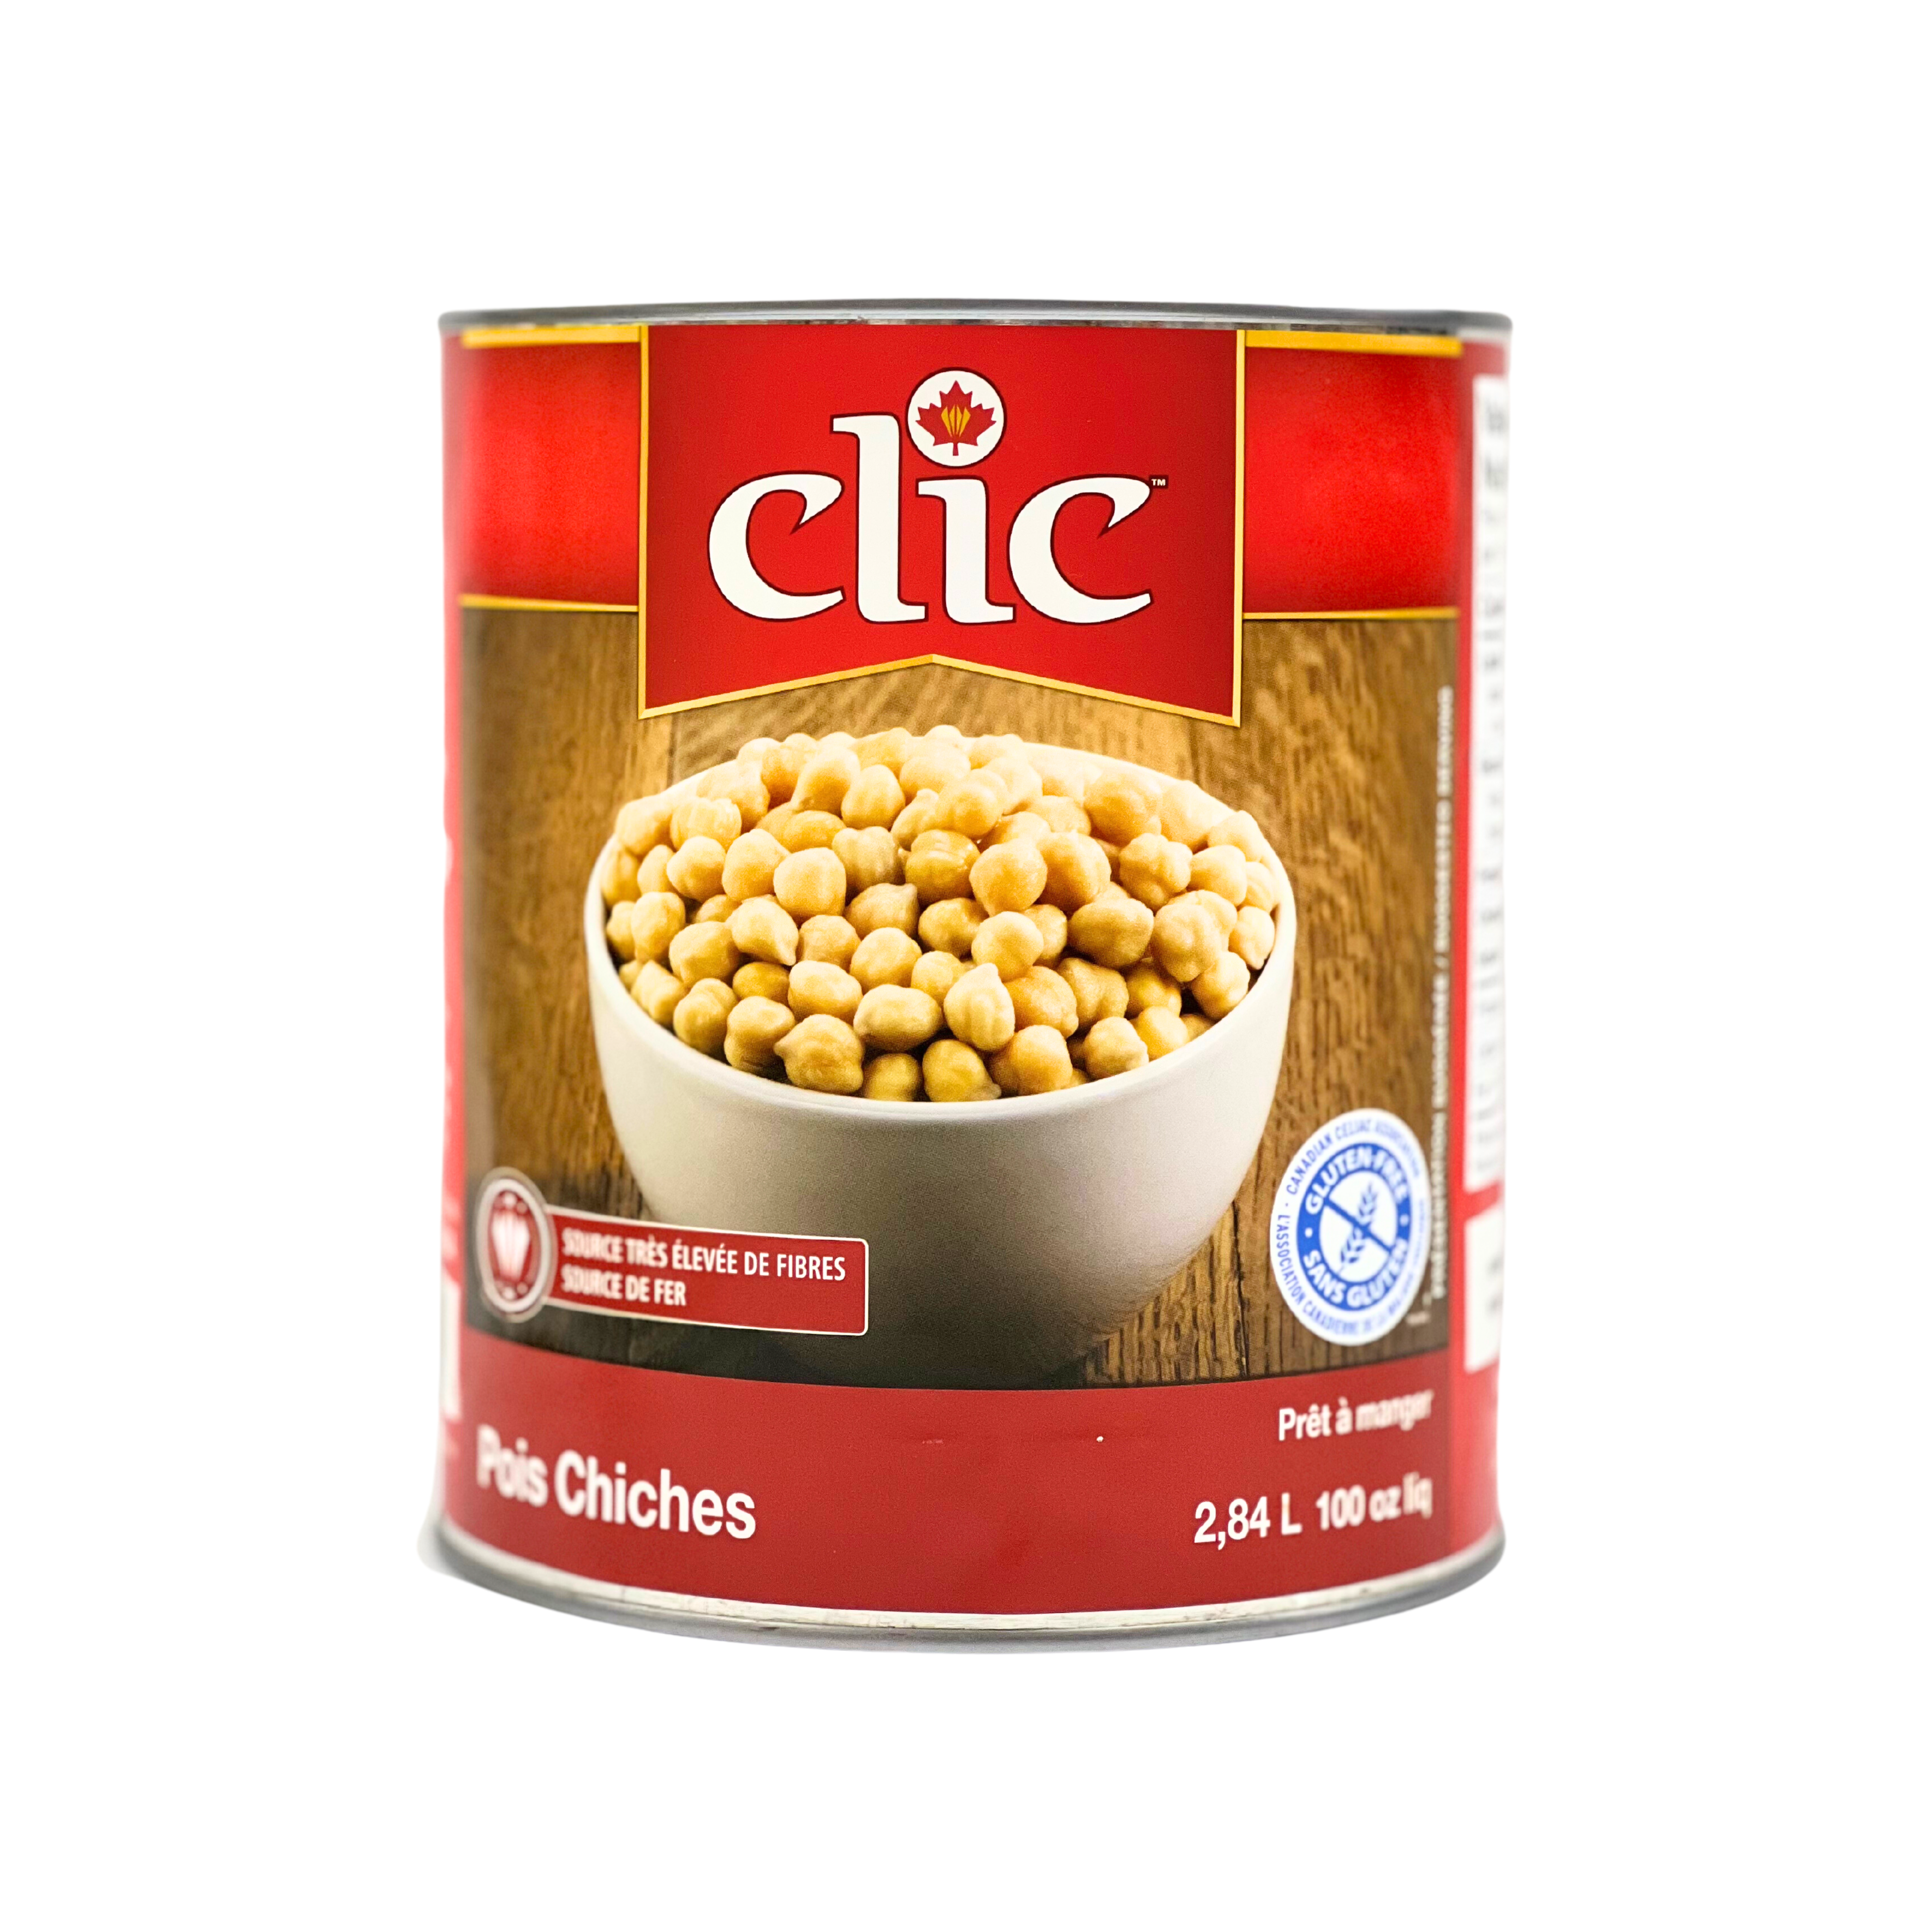 Clic Red Kidney Beans 2.84L